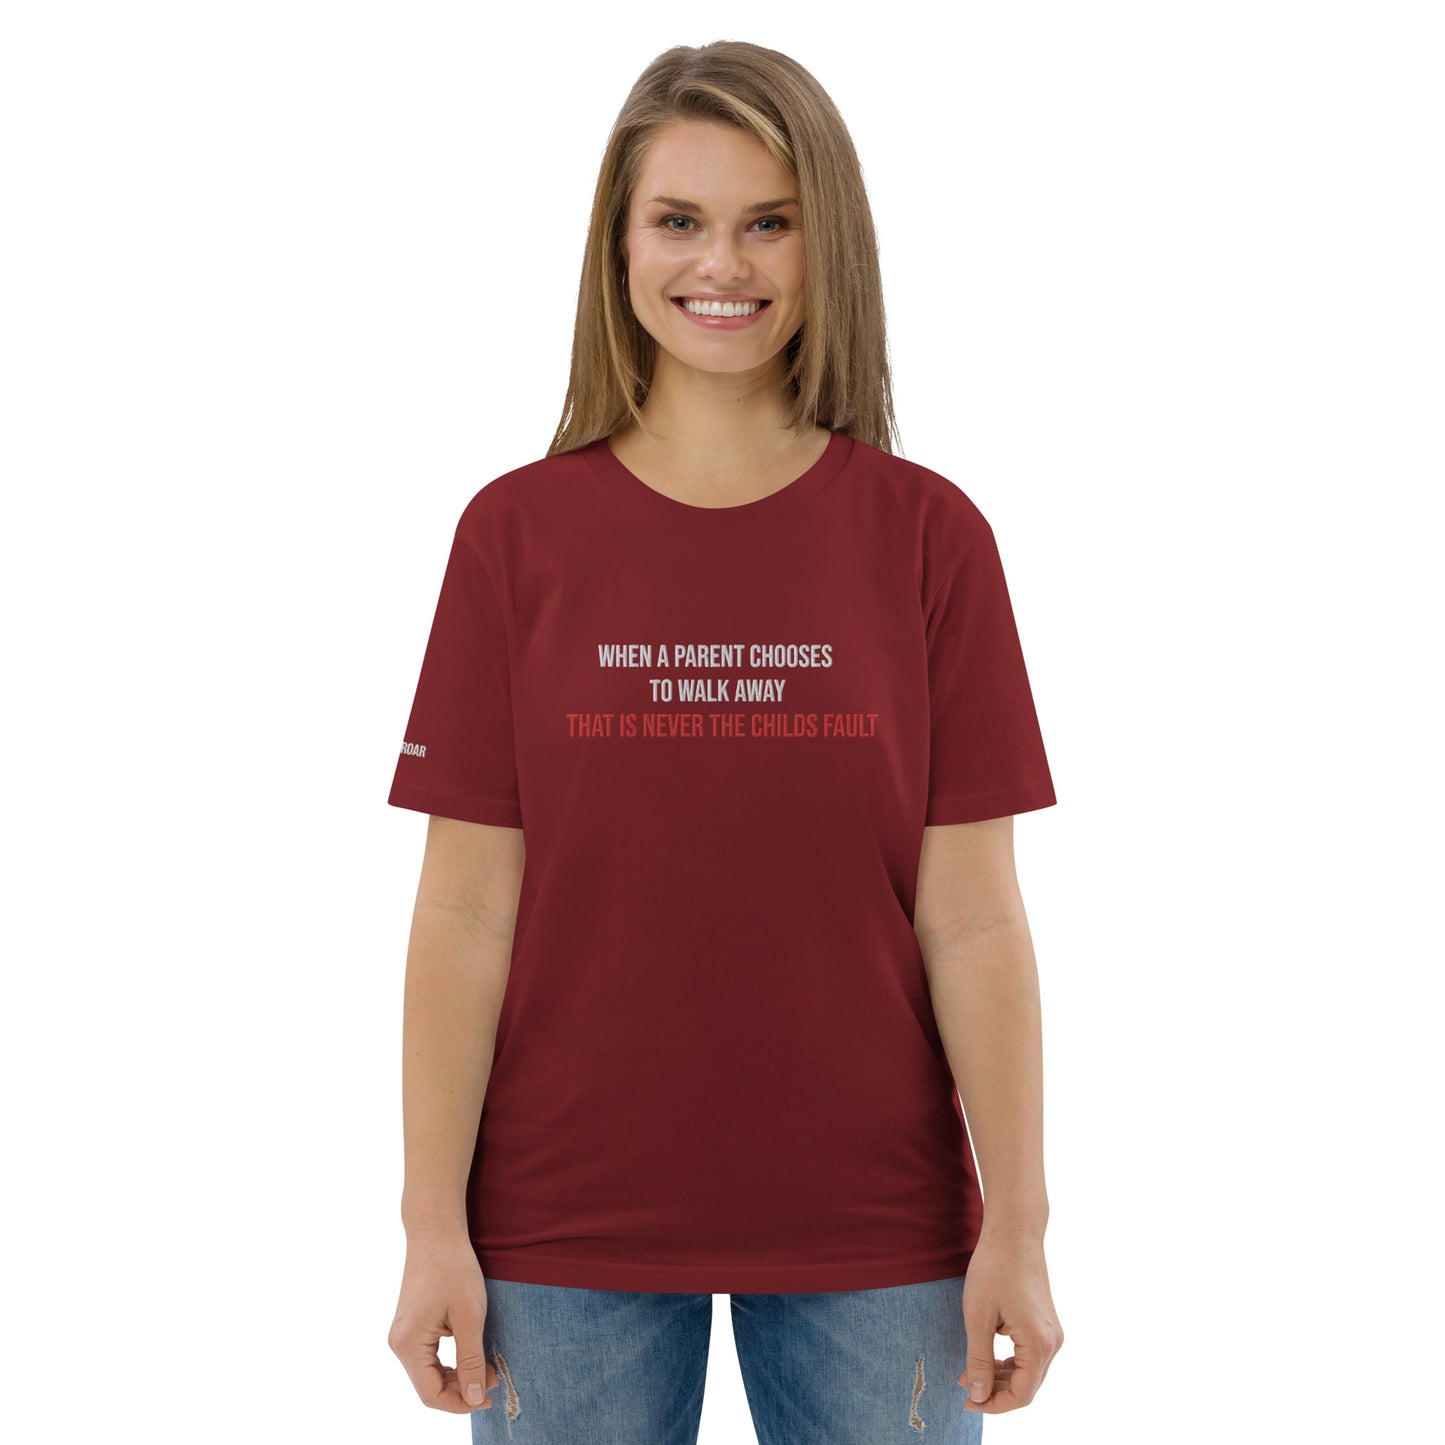 When A Parent Chooses To Walk Away That Is Never The Child's Fault Embroidered Unisex T-Shirt